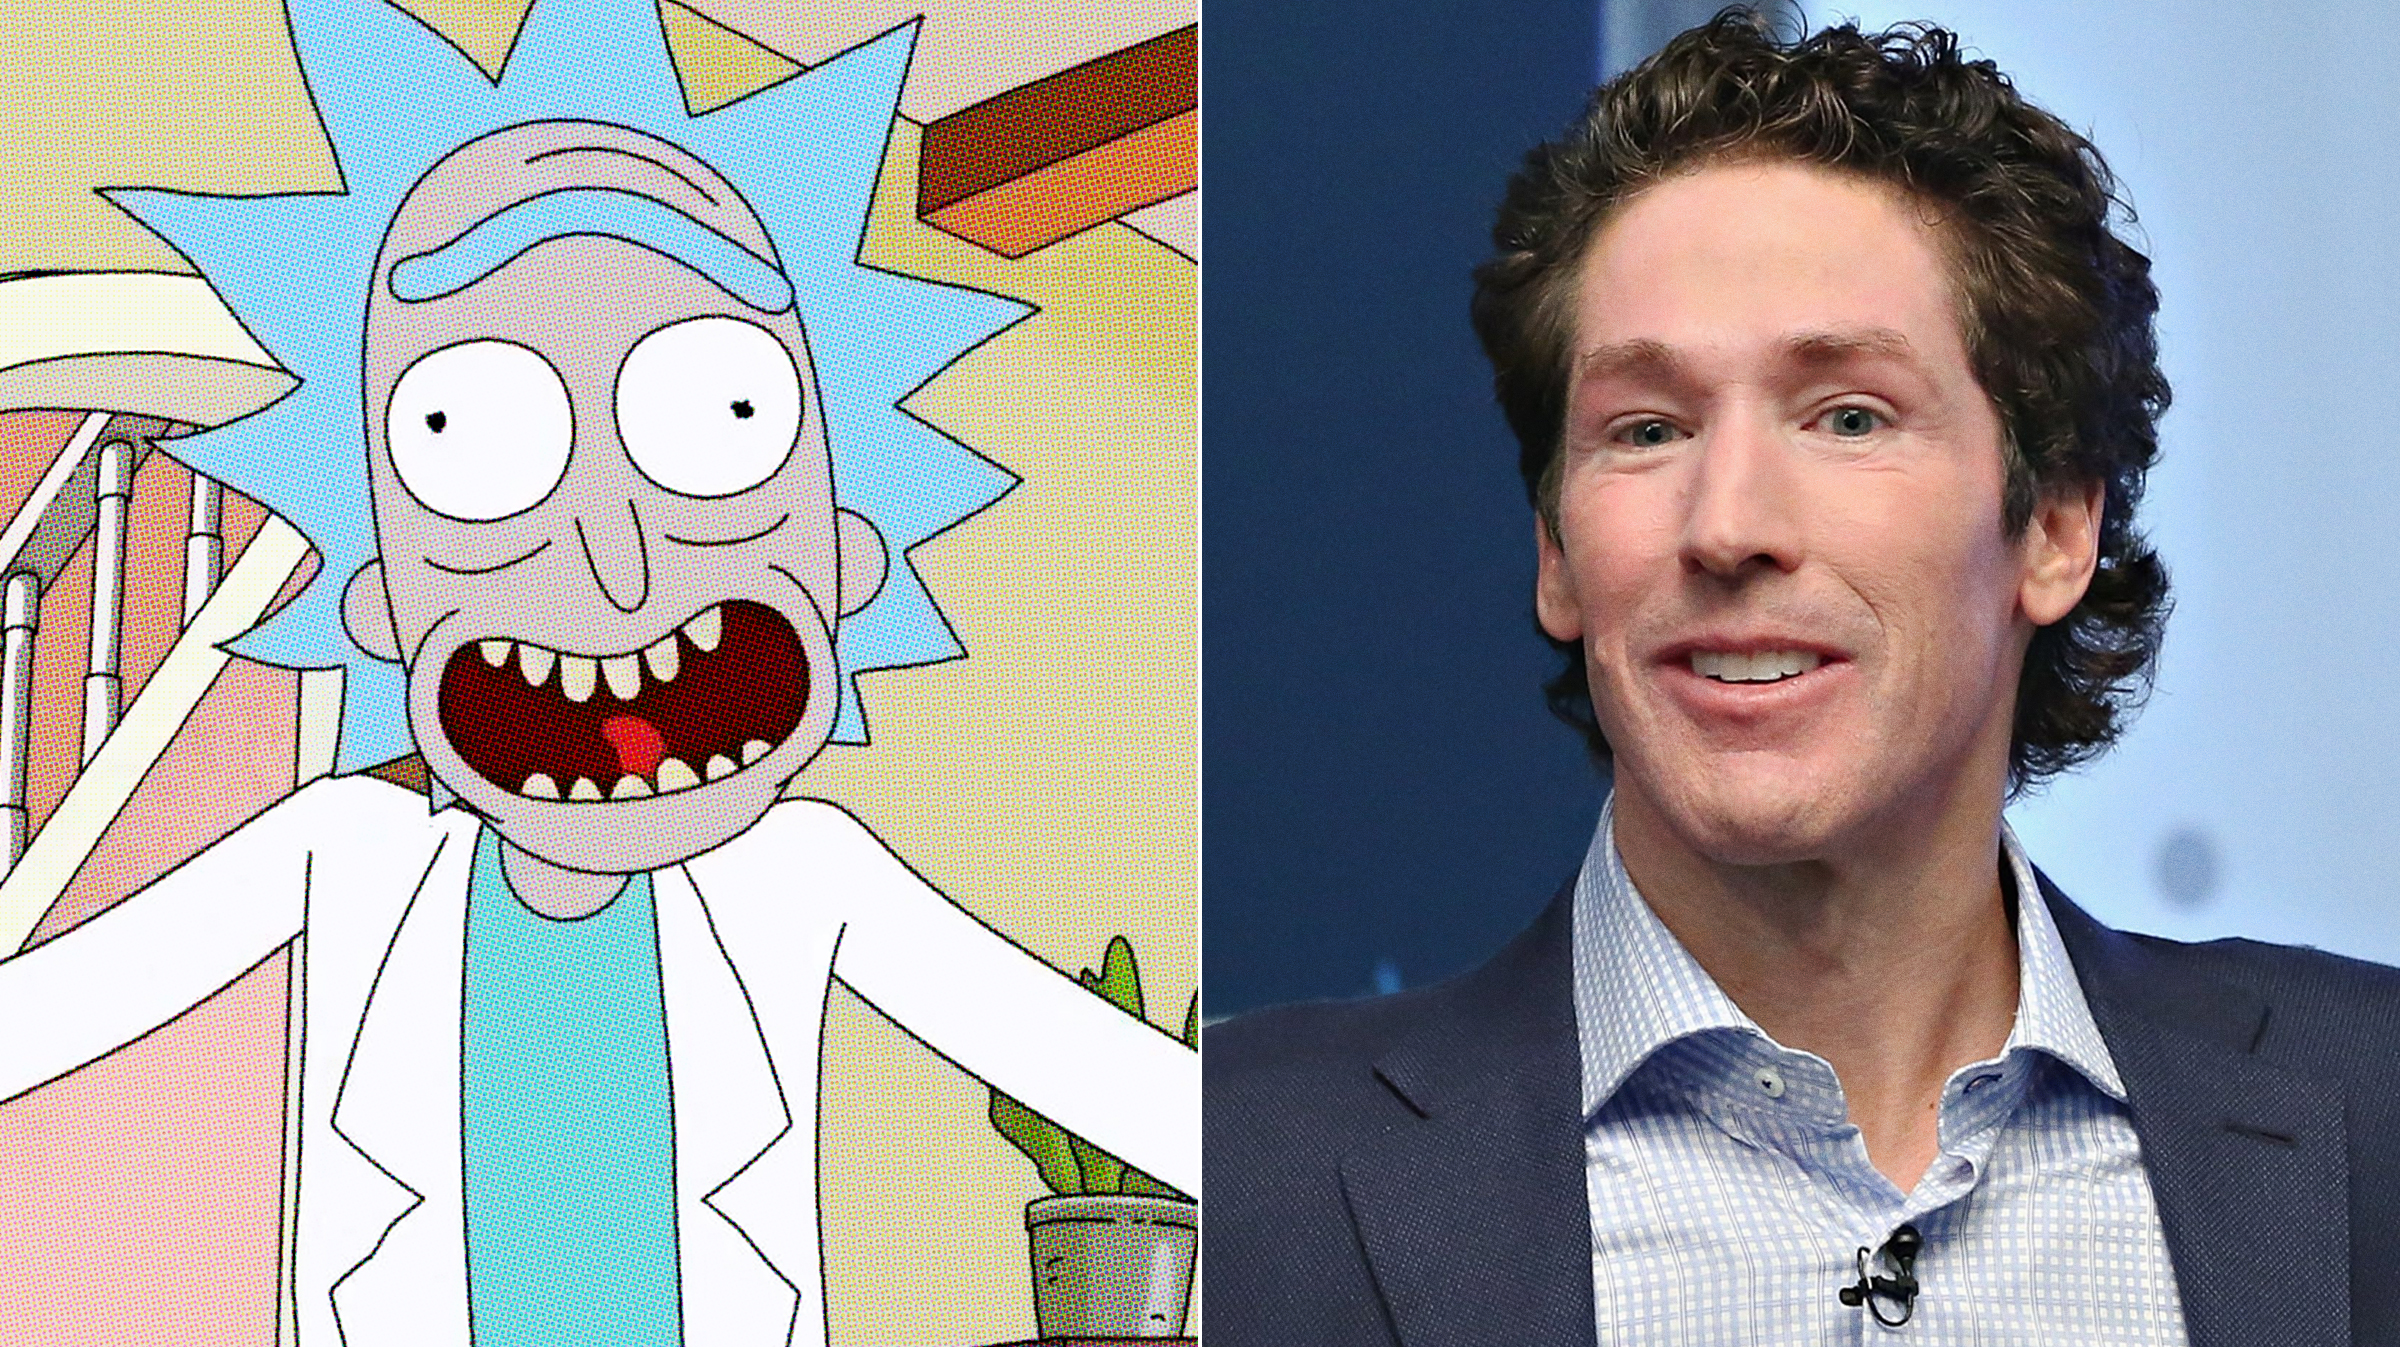 rick-from-rick-and-morty-prank-called-joel-osteen-s-church-site-title